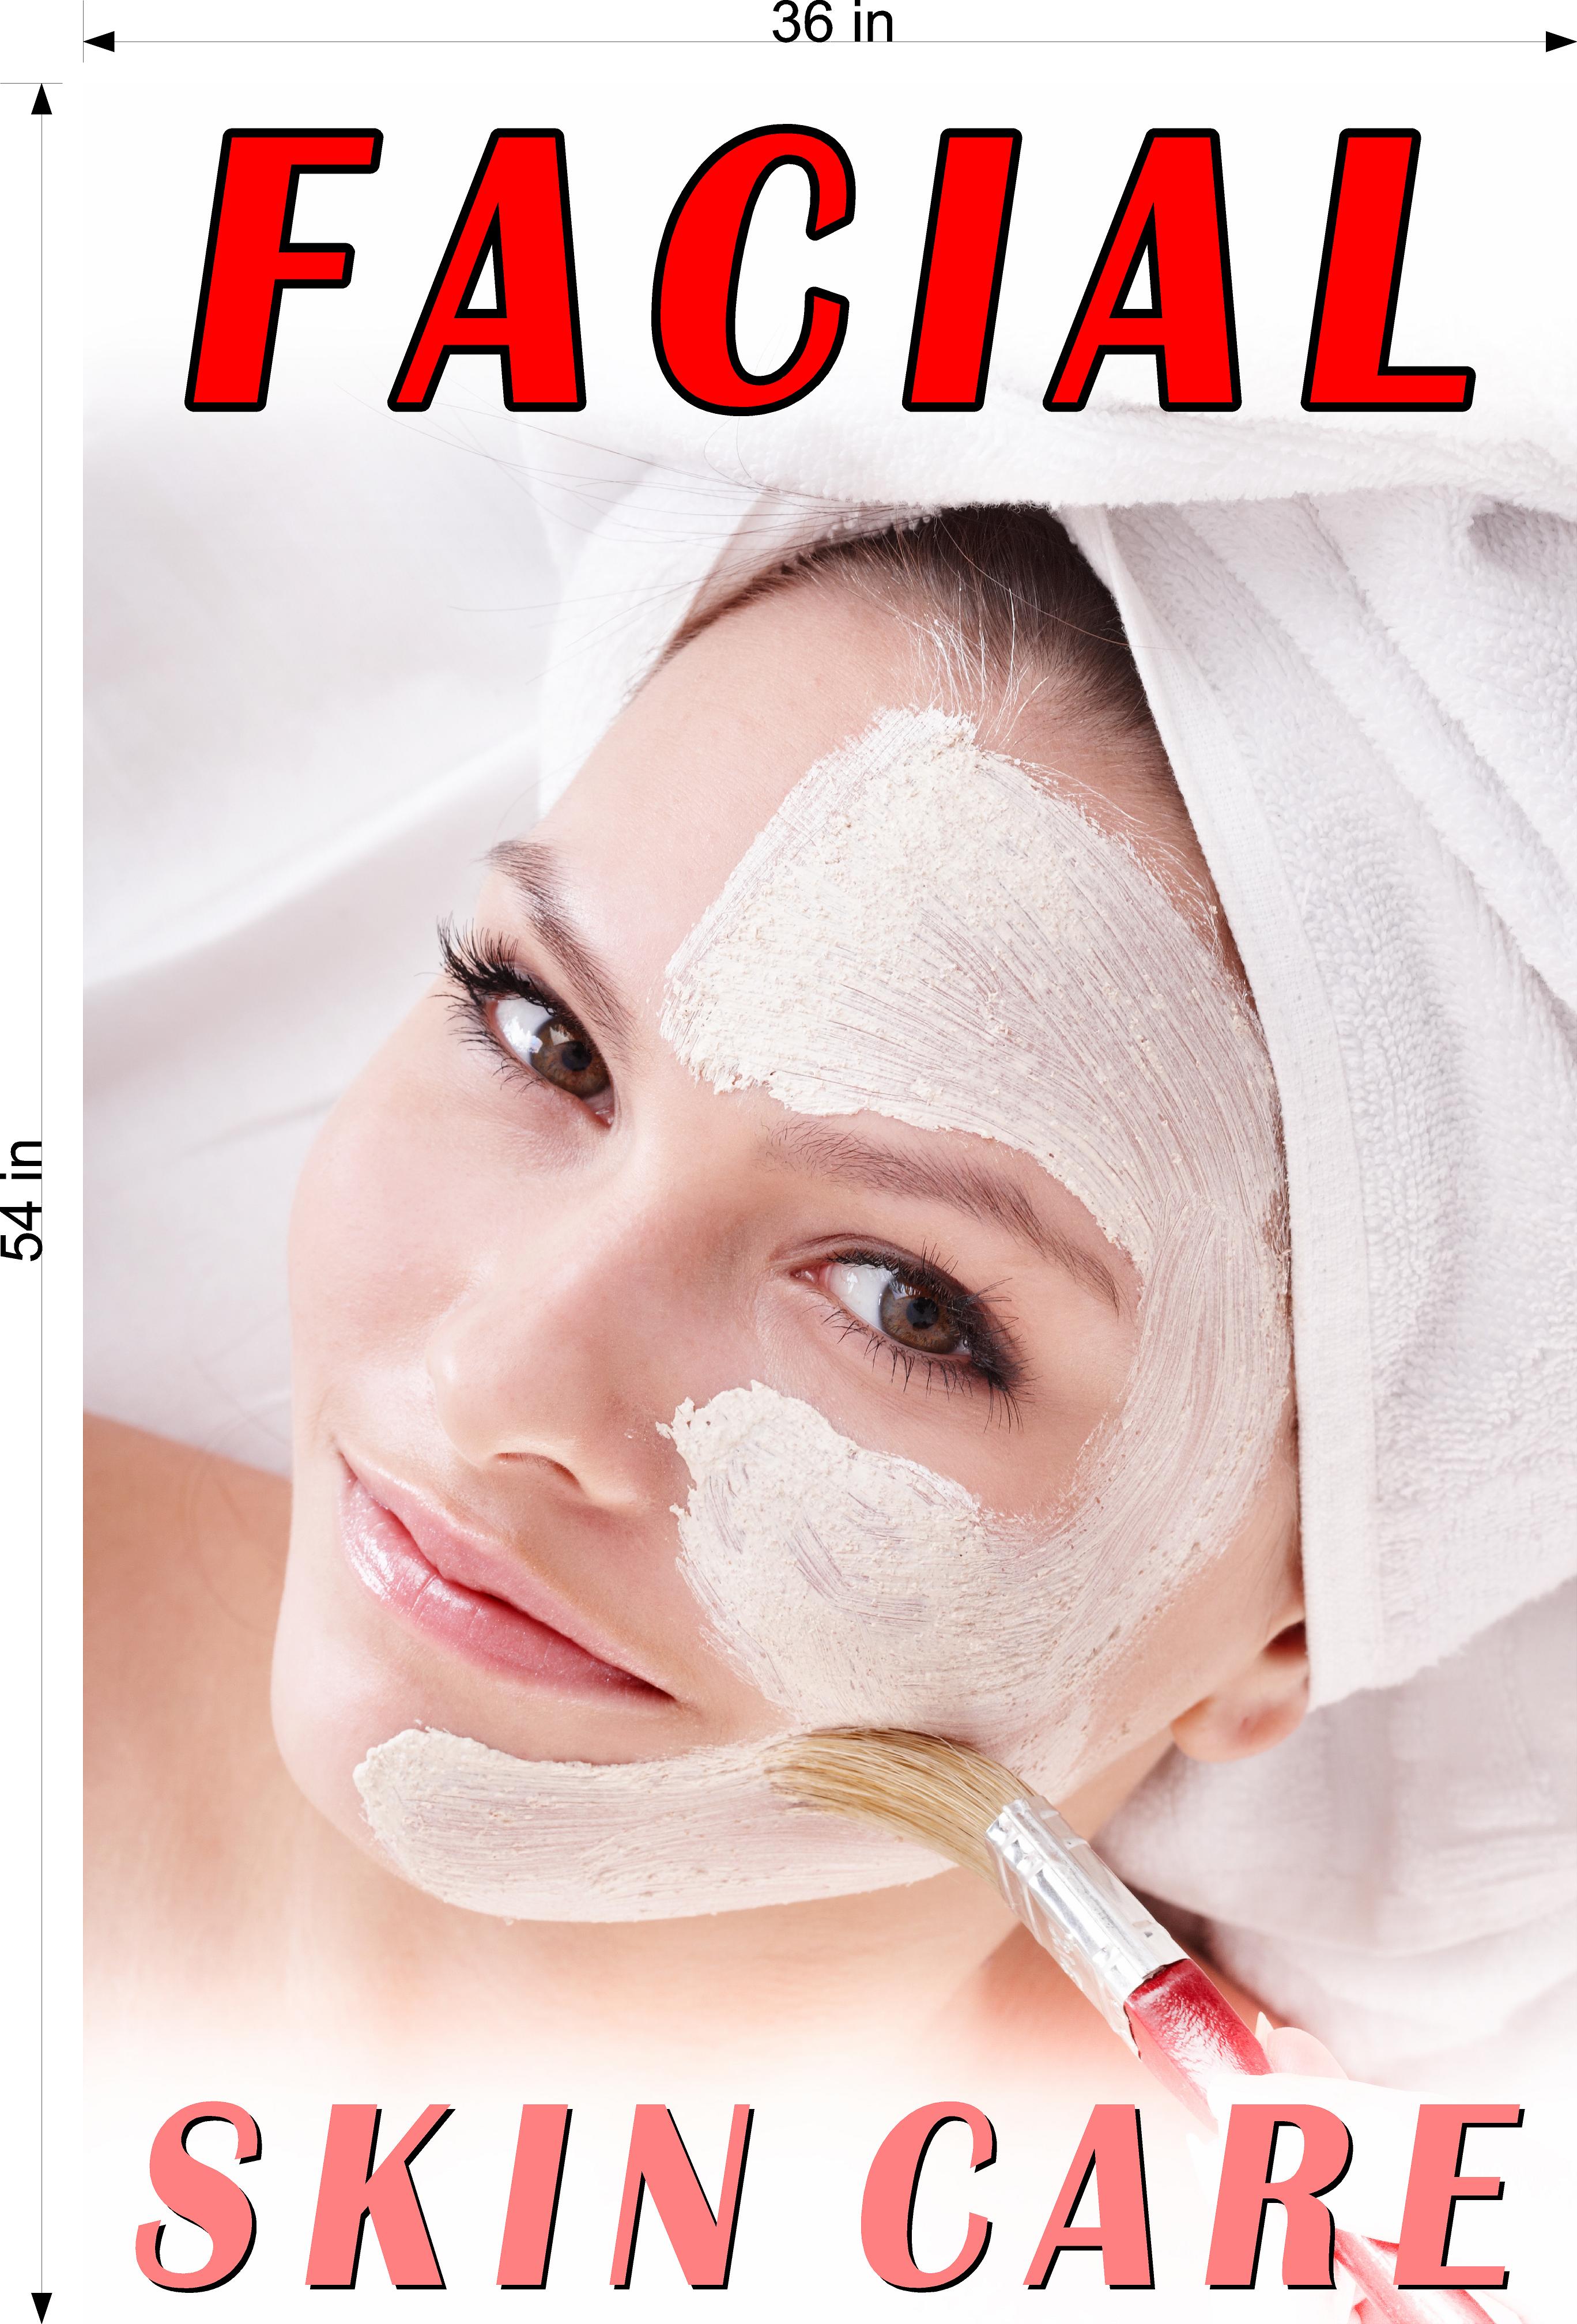 Facial 02 Photo-Realistic Paper Poster Interior Inside Wall Non-Laminated Vertical  Treatment Care